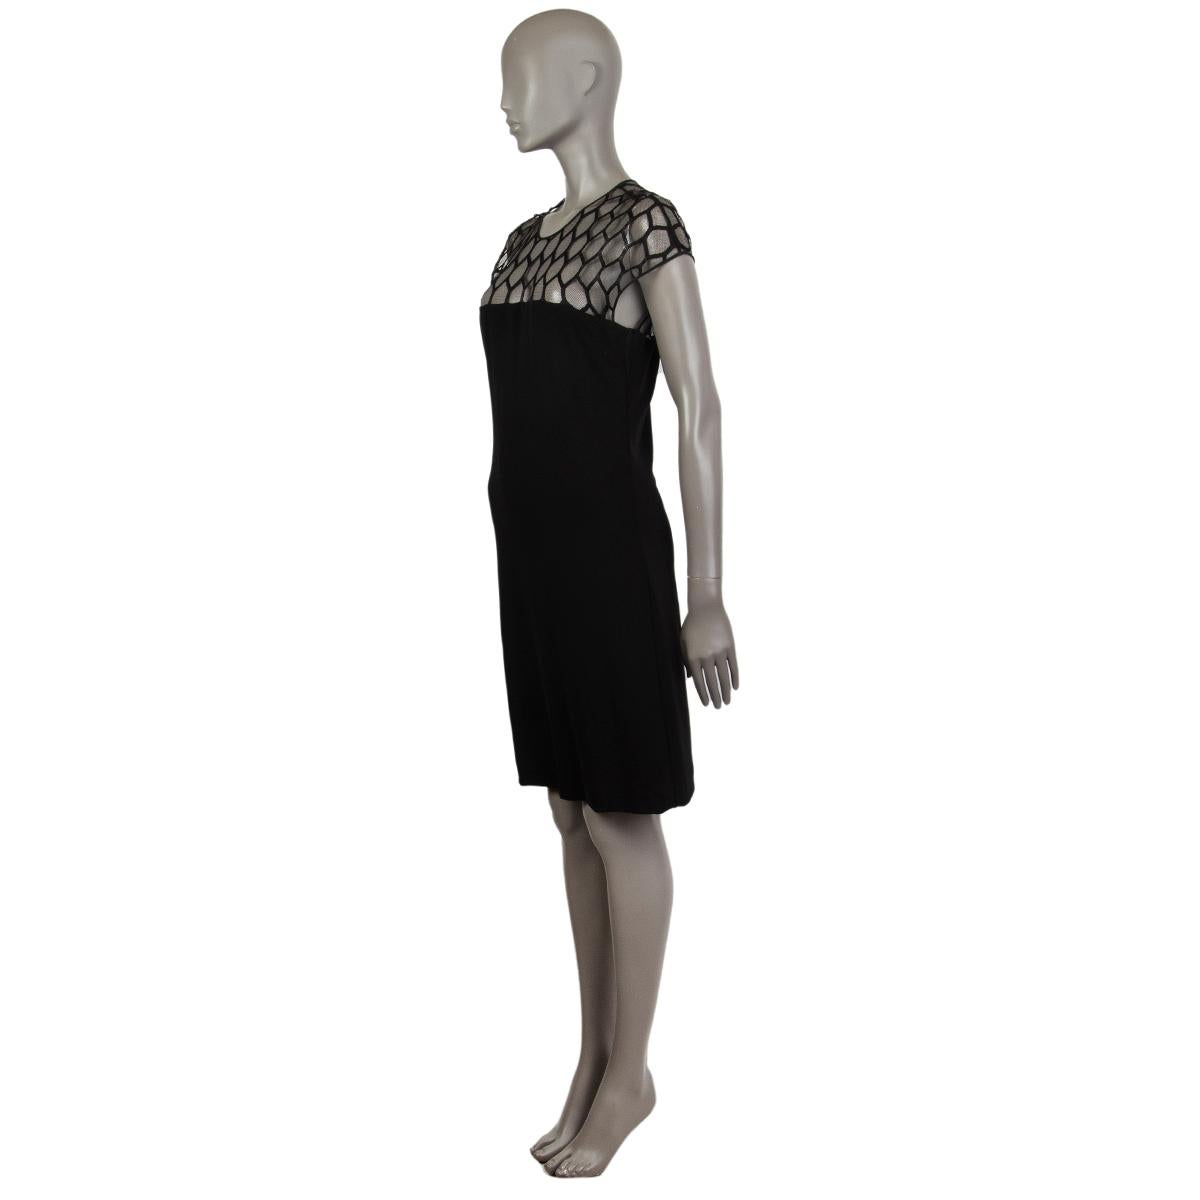 Gucci shift dress in black fabric. With mesh-lace top and keyhole back. Closes with fabric button behind the neck and invisible zipper on the back. Lined in black fabric. Has been worn and is in excellent condition.

Tag Size L
Size L
Shoulder Width